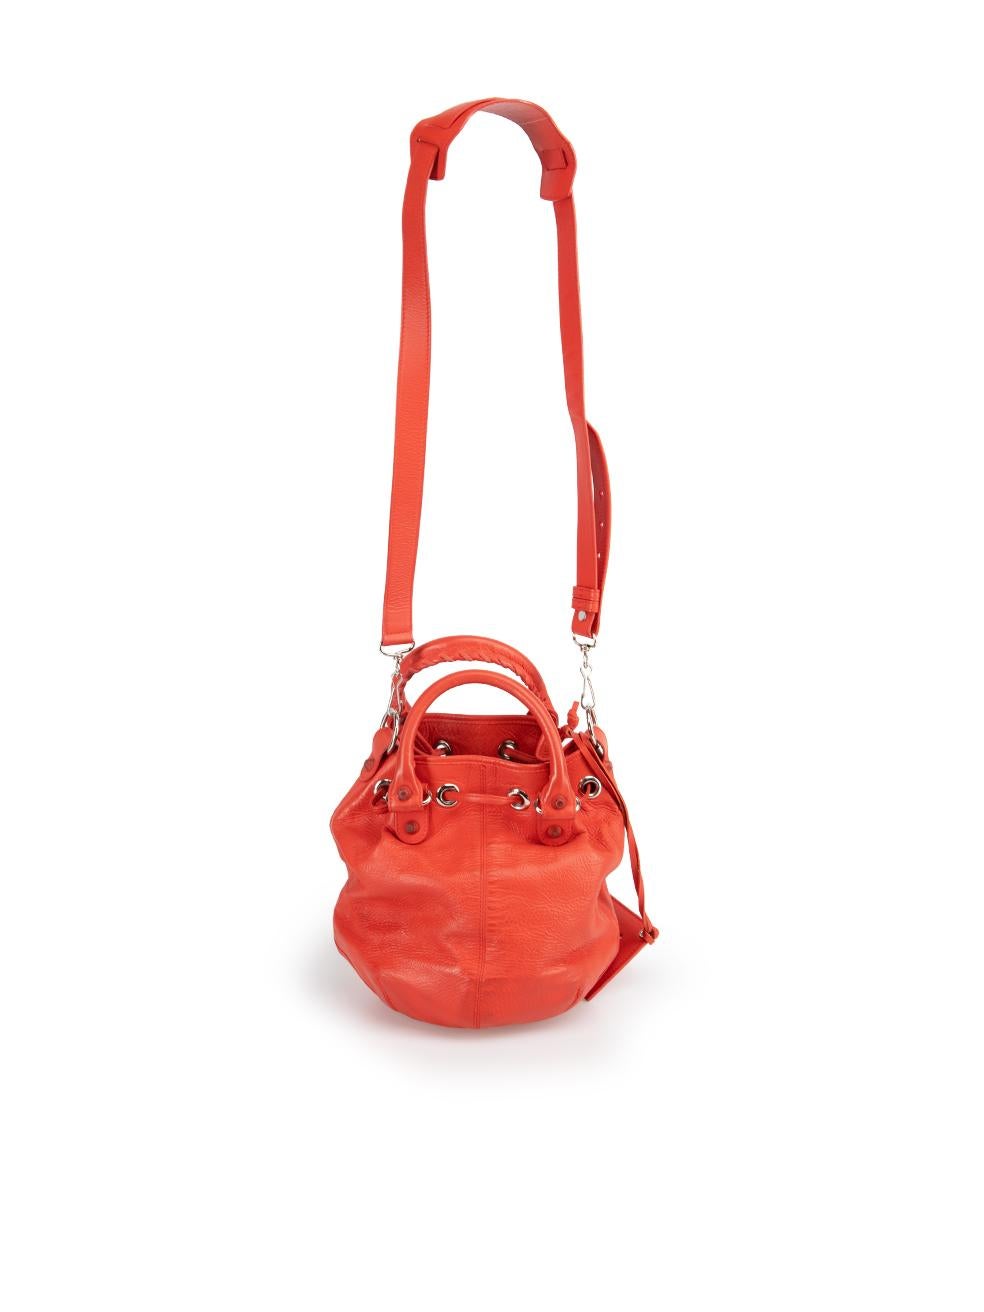 Balenciaga Red Leather Motocross Classic Mini Pompon Bag In Excellent Condition For Sale In London, GB